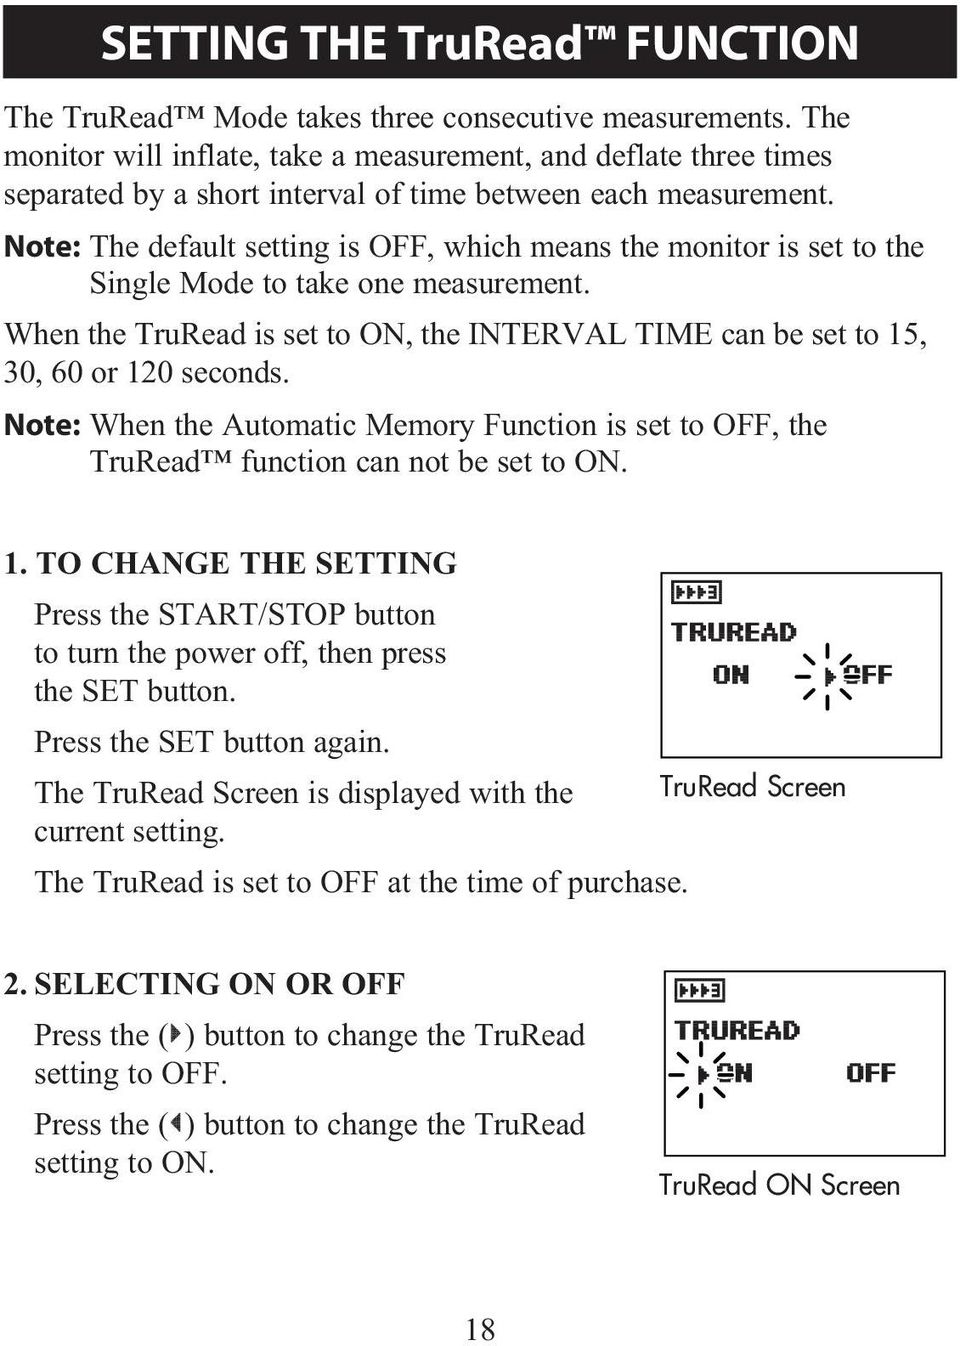 Note: The default setting is OFF, which means the monitor is set to the Single Mode to take one measurement. When the TruRead is set to ON, the INTERVAL TIME can be set to 15, 30, 60 or 120 seconds.